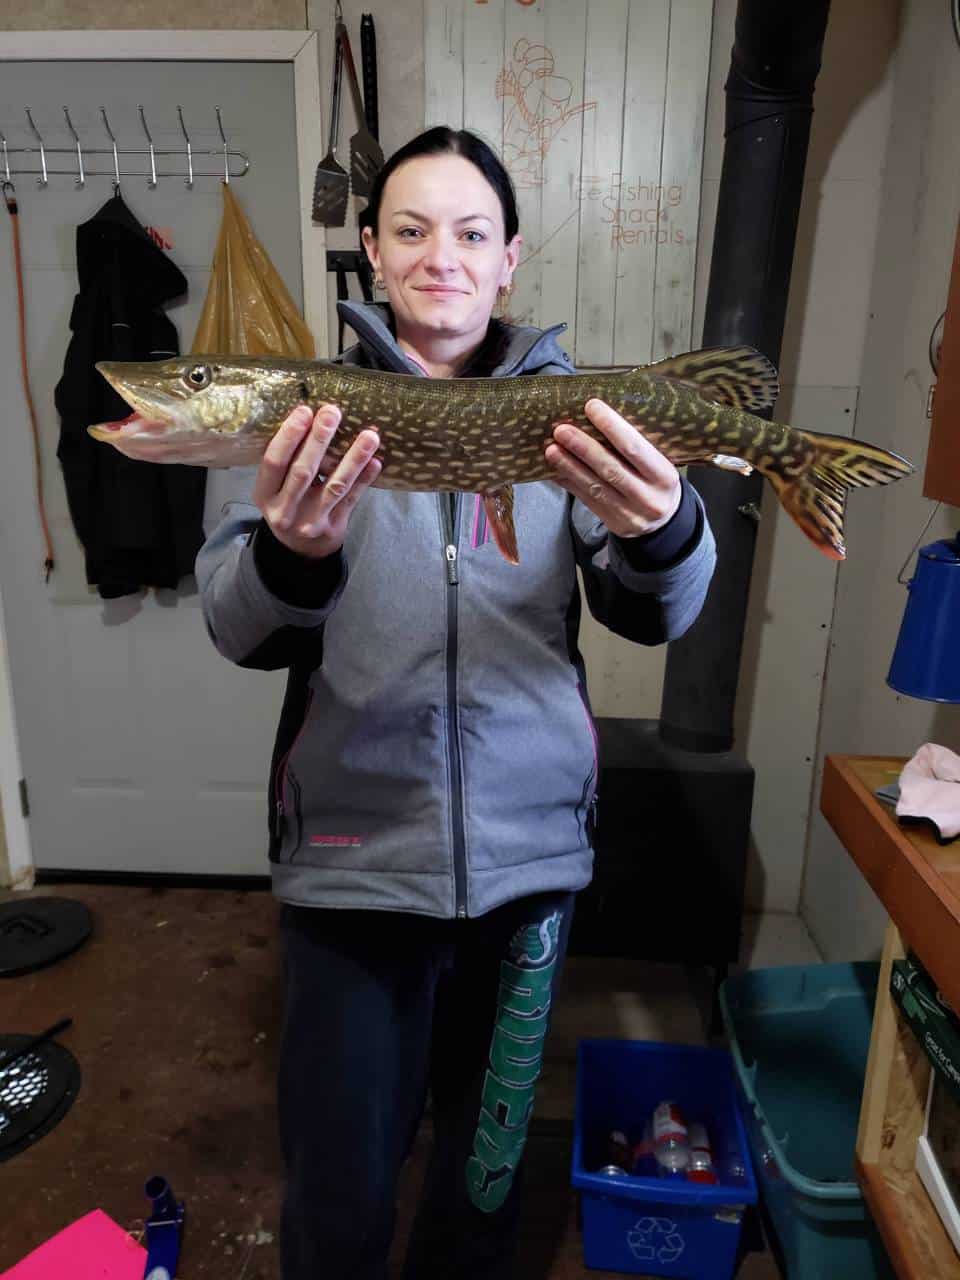 Gull Lake, AB - A northern pike from an over night ice fishing trip